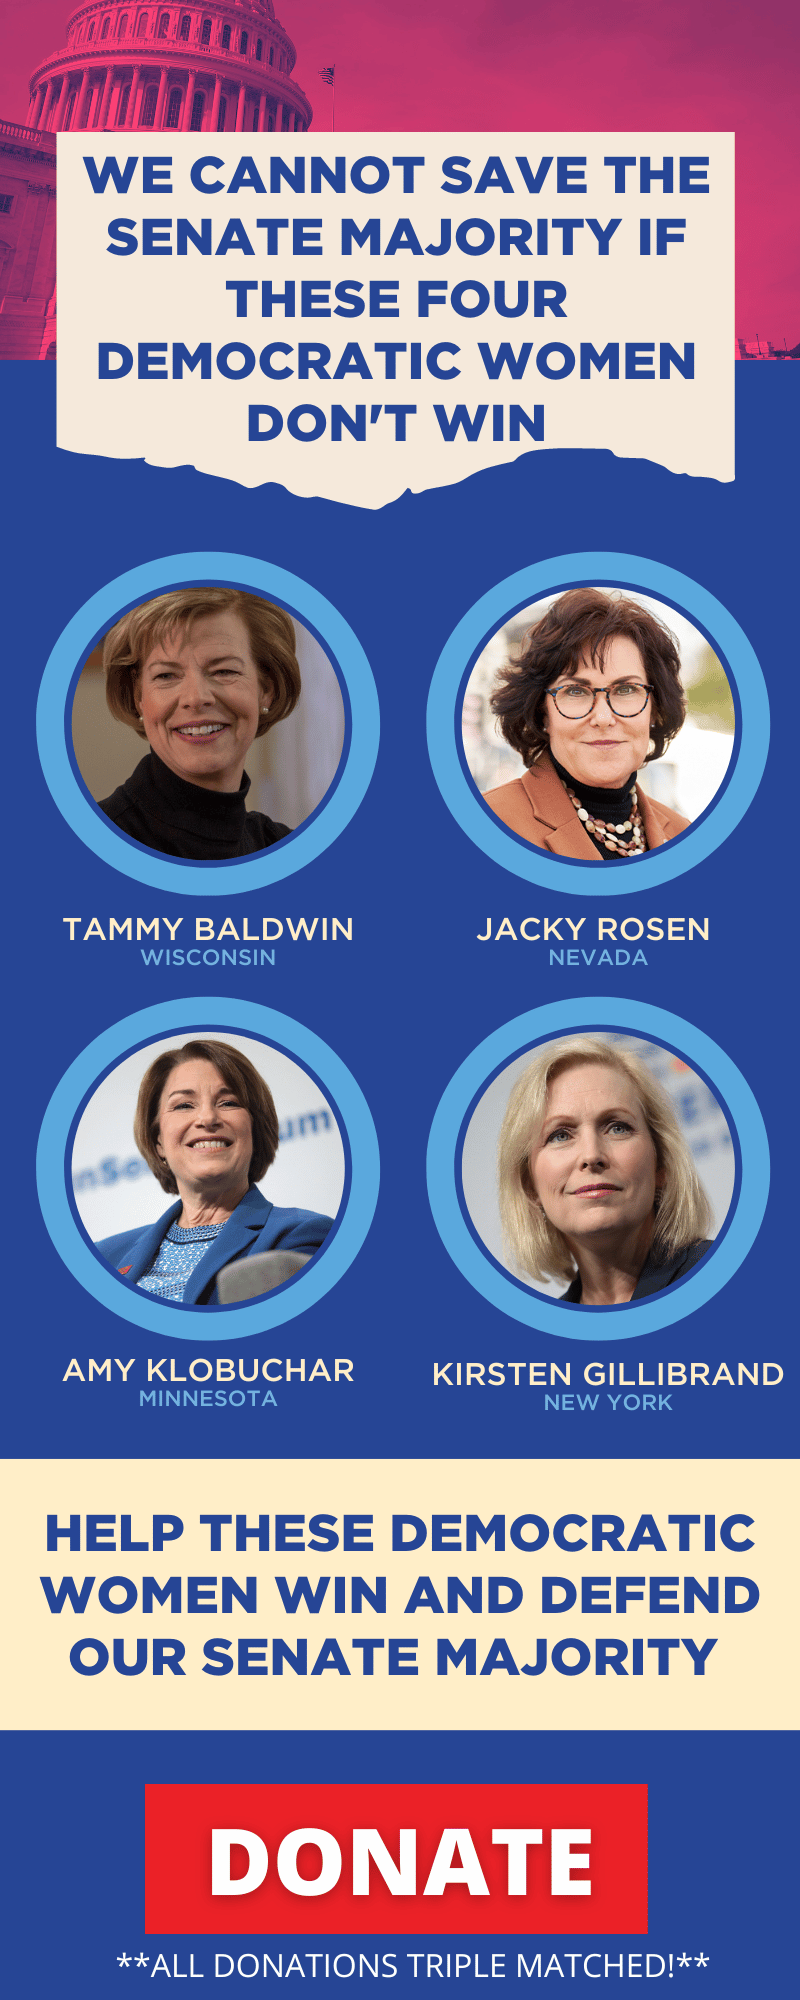 We cannot save the Senate Majority if these four Democratic women don't win!